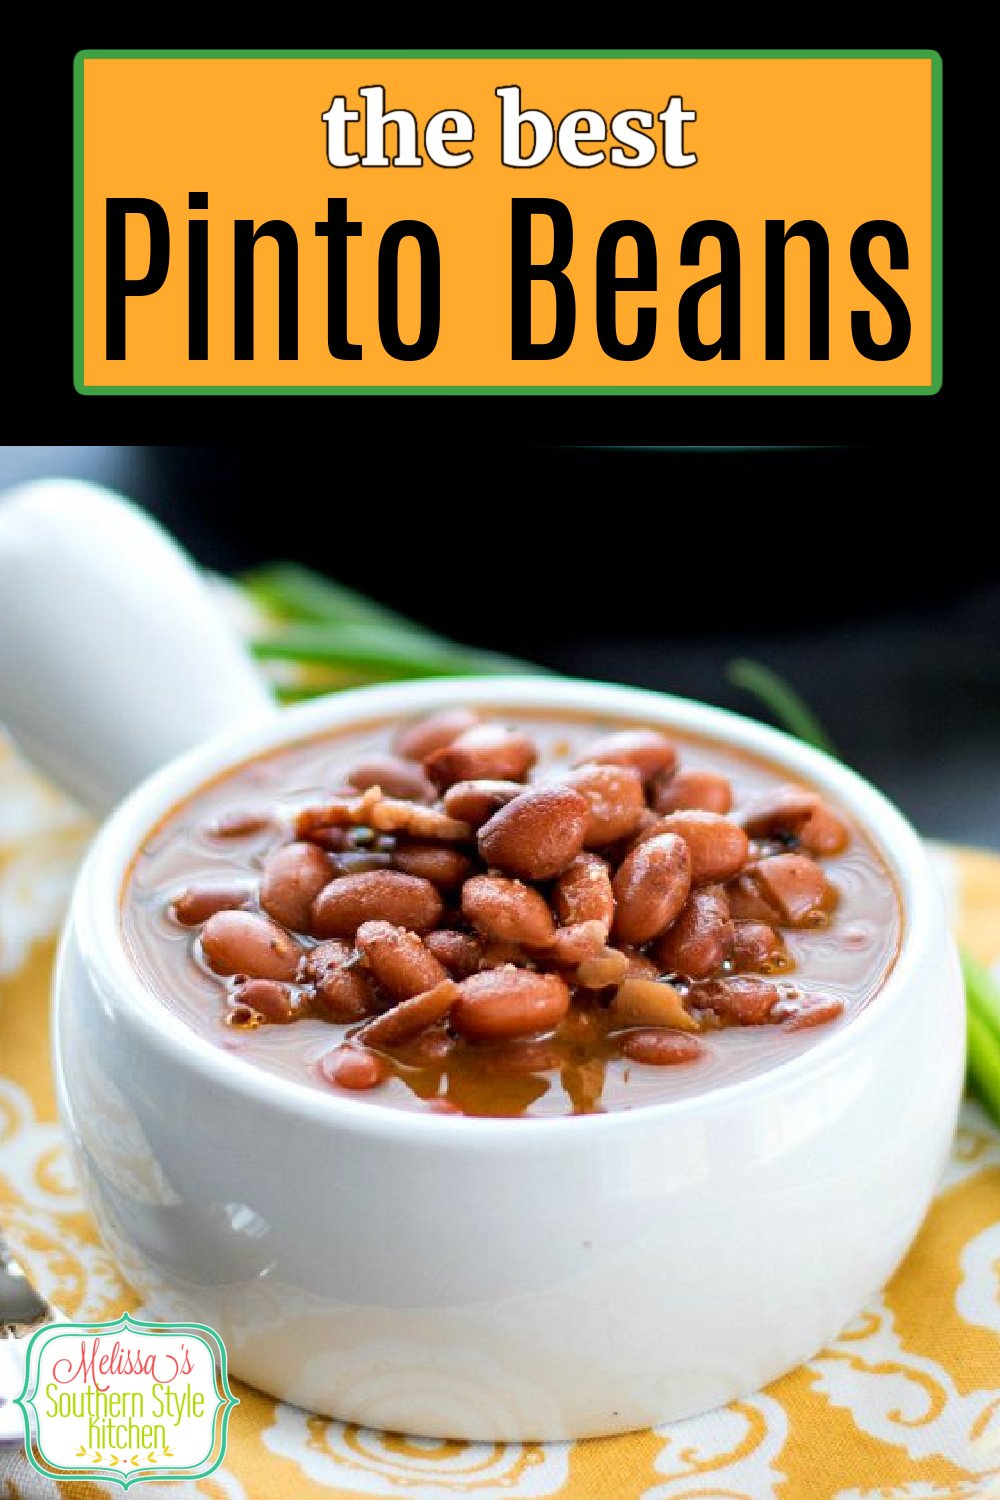 The addition of bacon and a fresh blend of seasonings elevates this budget friendly Southern classic #pintobeans #perfectpintobeans #beansrecipes #southernfood #dinner #dinnerideas #familyfriendly #budgetfriendlyrecipes #beans #brownbeans #maindish #sidedishrecipes #southernrecipes via @melissasssk